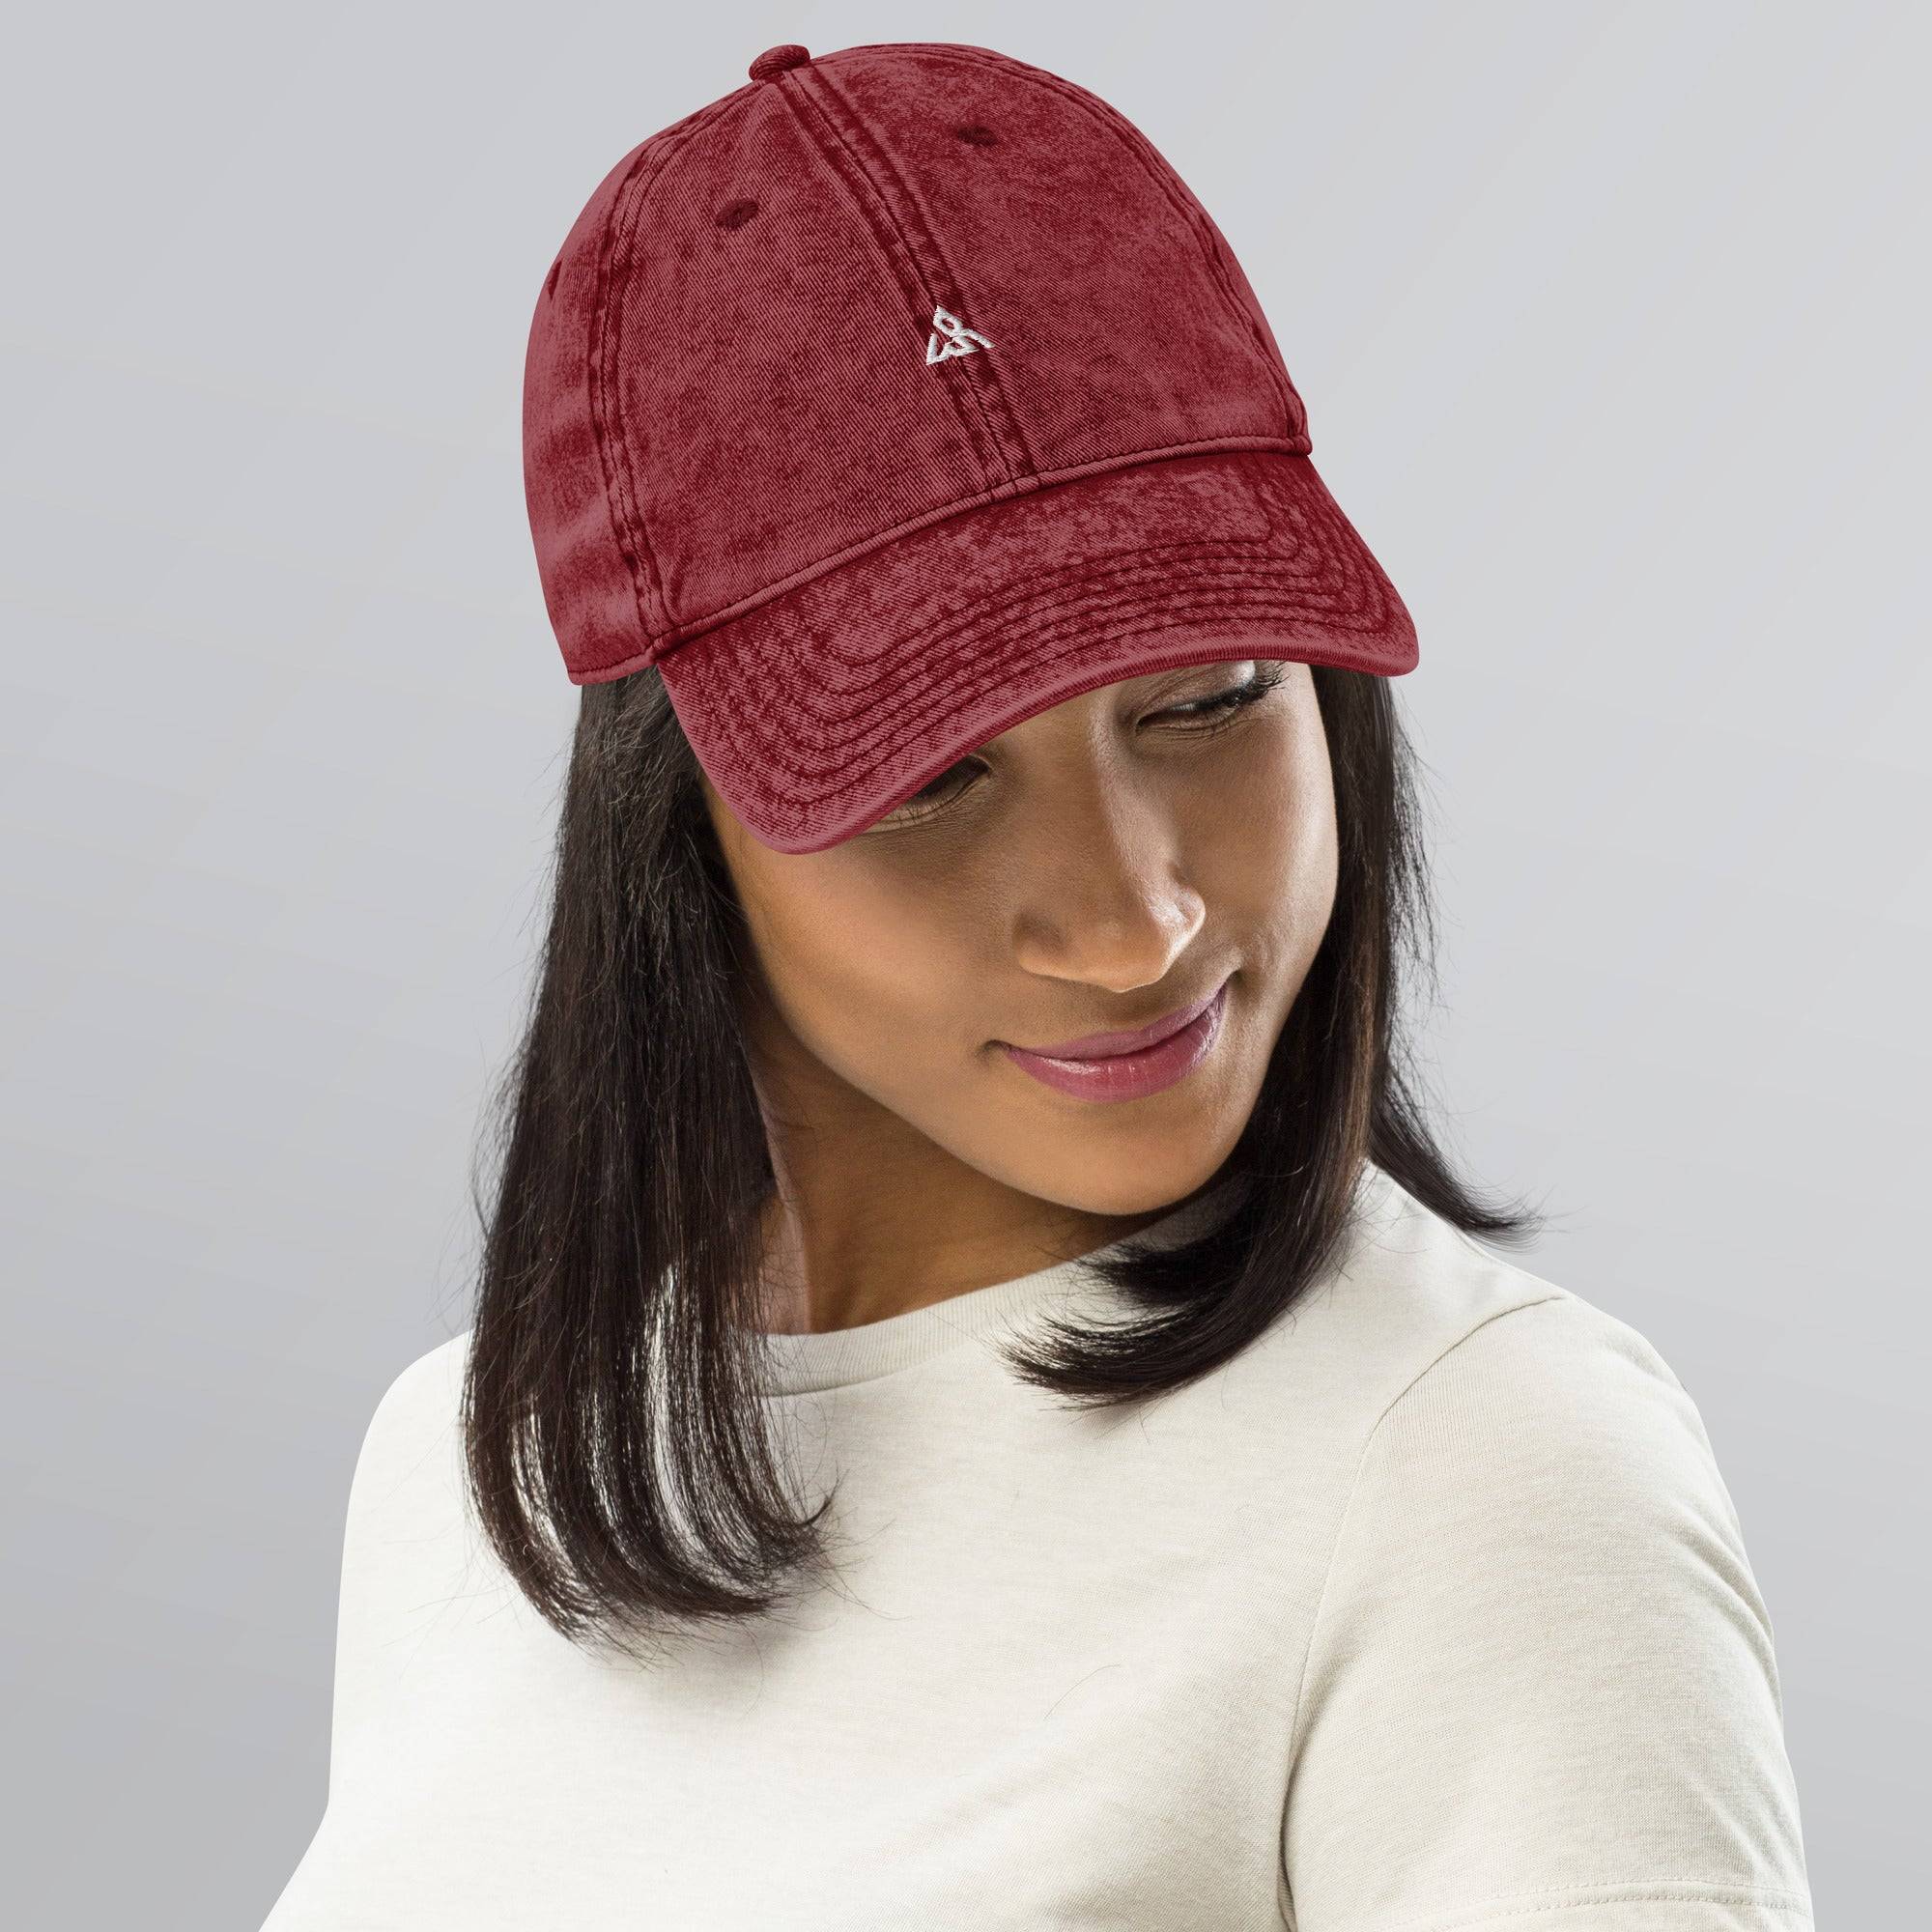 Vintage Cotton Twill Cap | Washed Out Vintage Fabric - Revive Wear     Vintage Cotton Twill Cap. Shop Summer Hats at Revive Wear for your active lifestyle and fashion accessory. Purchase your favorite Summer Hat Today.